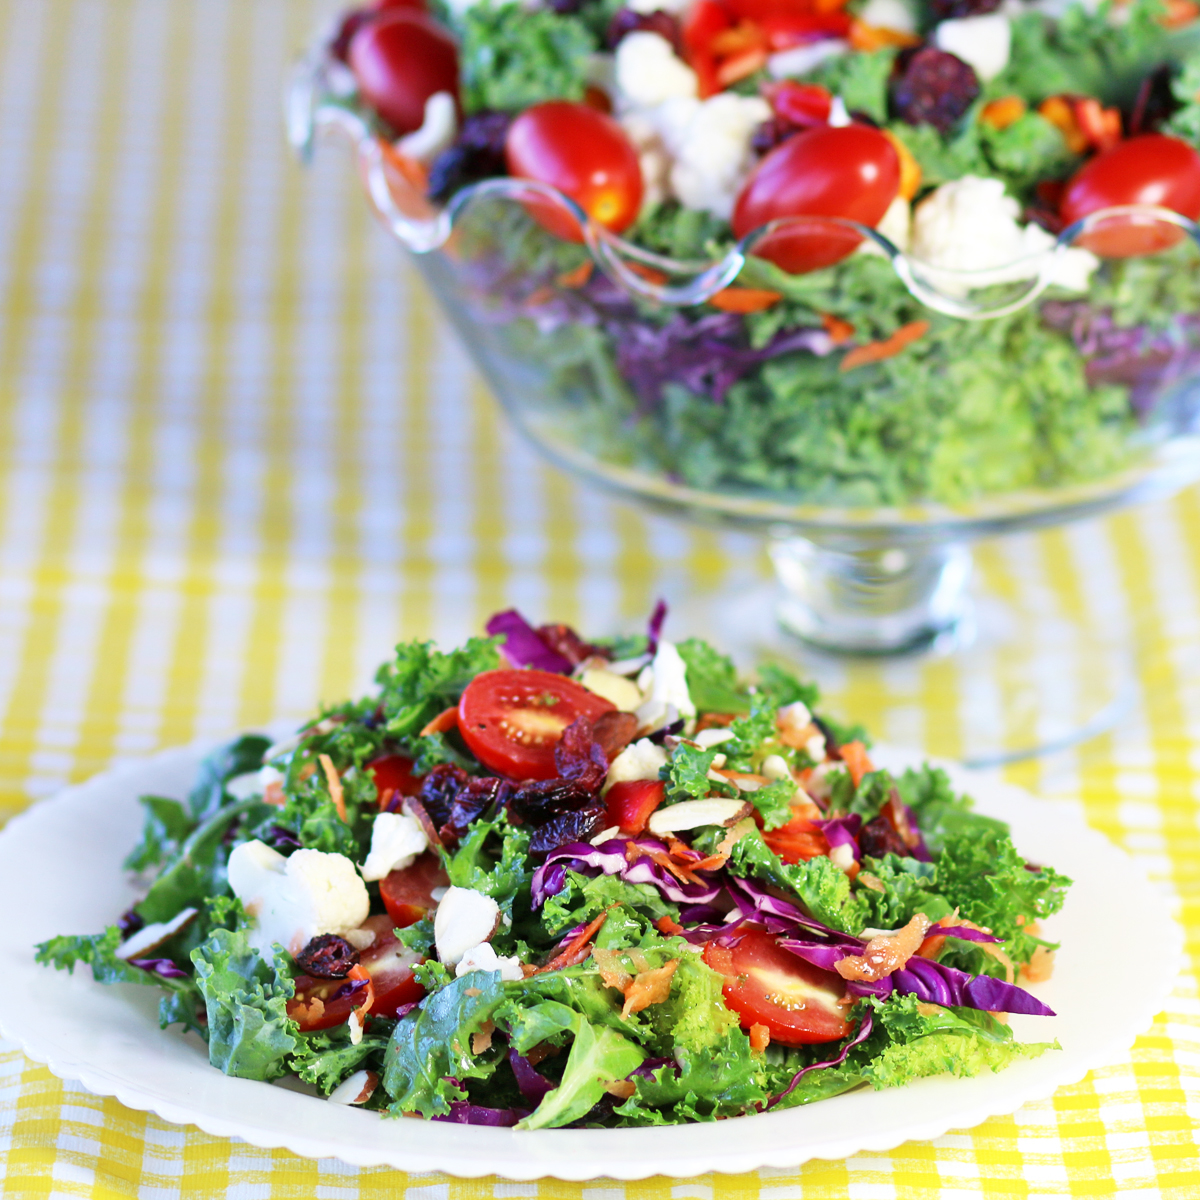 Kale Salad with Almonds, Jicama and Dried Cranberries